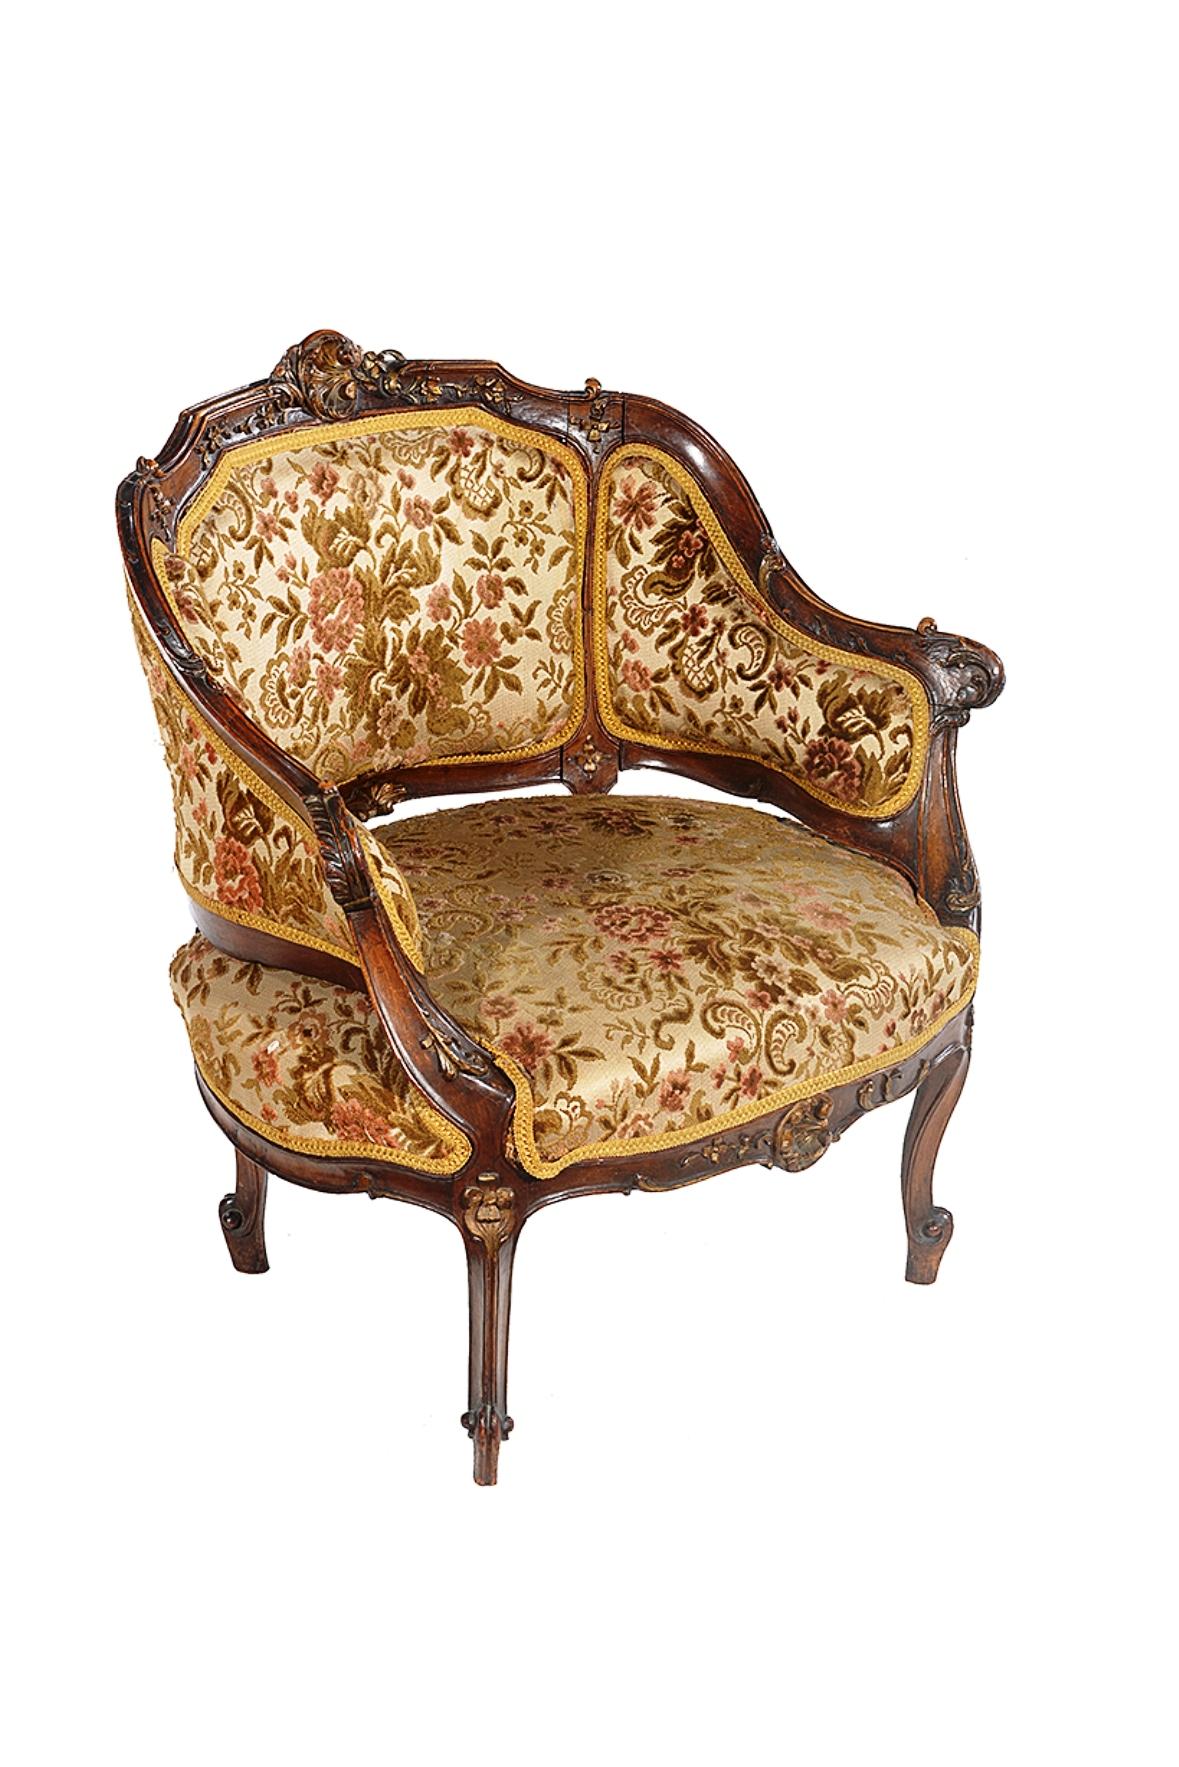 A late 19th century French Louis XV walnut framed bergère chair of petite proportions.
The moulded frame carved with leaves and flowers, the padded back, sides and seat upholstered in a plush floral fabric, the whole raised on scrolling cabriole